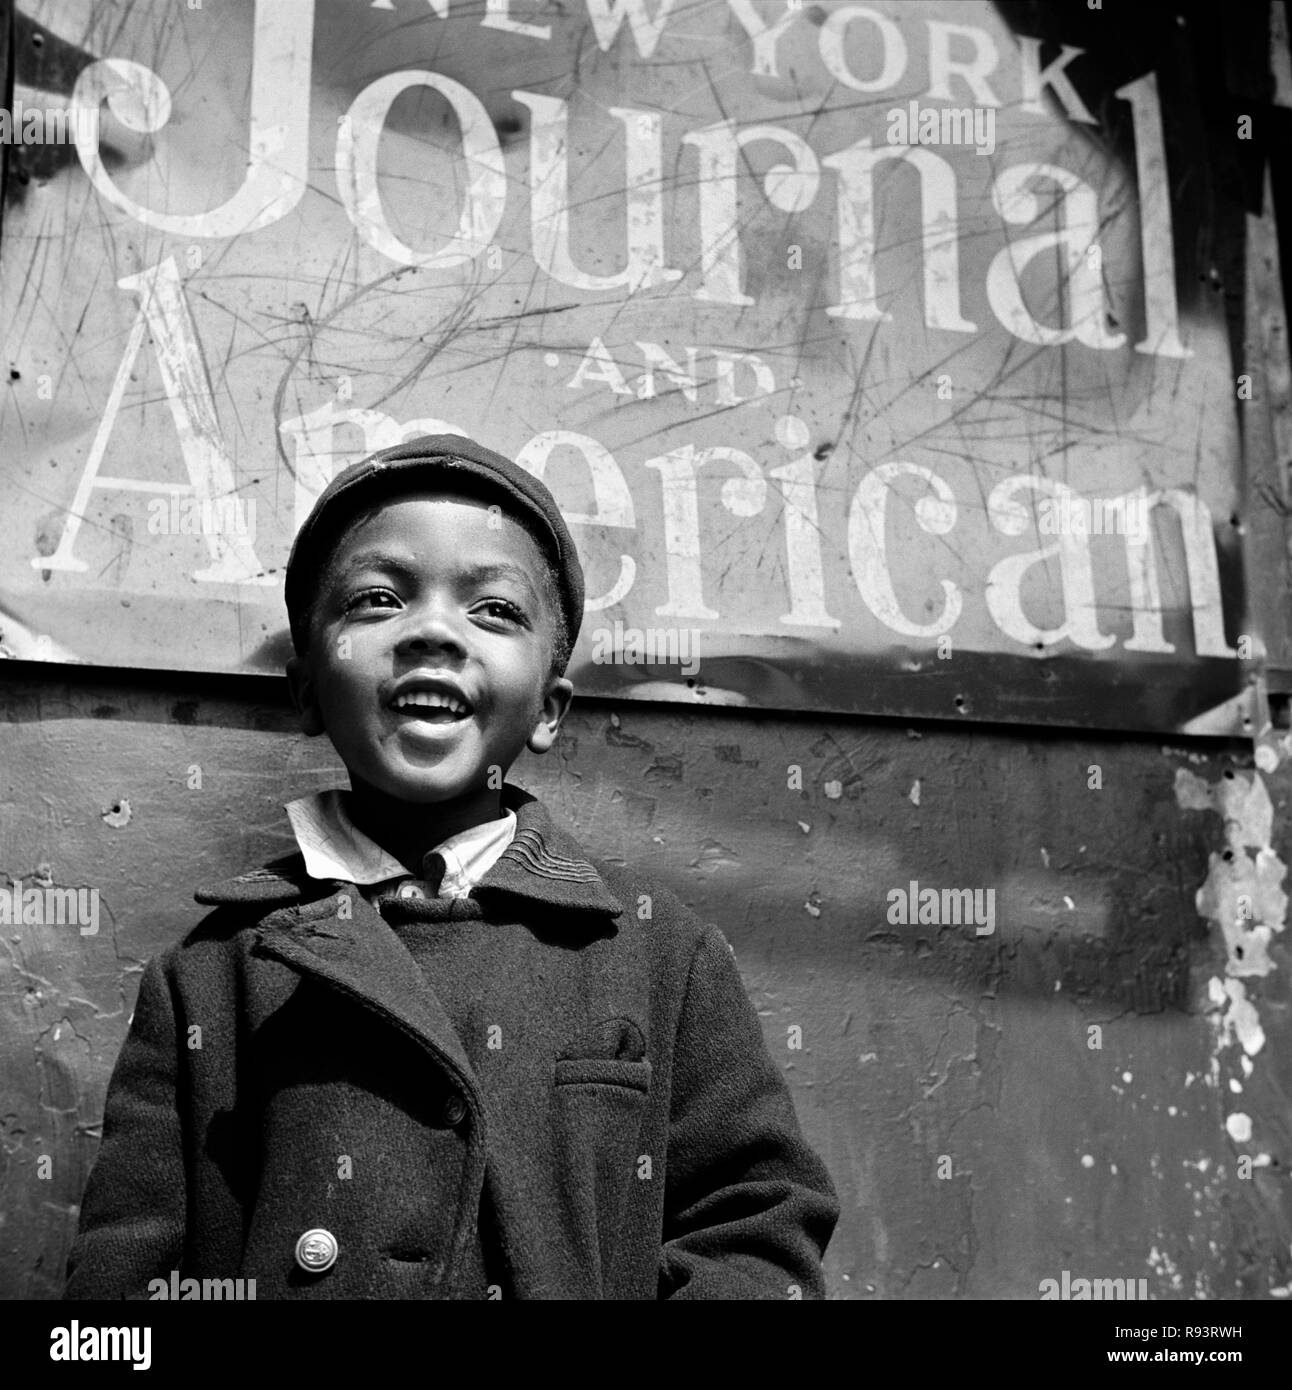 Harlem newsboy - New York, NY. Circa June 1943. Photograph by Gordon Parks/FSA    This archival print is available in the following sizes:    8' x 10'   $15.95 w/ FREE SHIPPING  11' x 14' $23.95 w/ FREE SHIPPING  16' x 20' $59.95 w/ FREE SHIPPING  20' x 24' $99.95 w/ FREE SHIPPING    * The American Photoarchive watermark will not appear on your print. Stock Photo